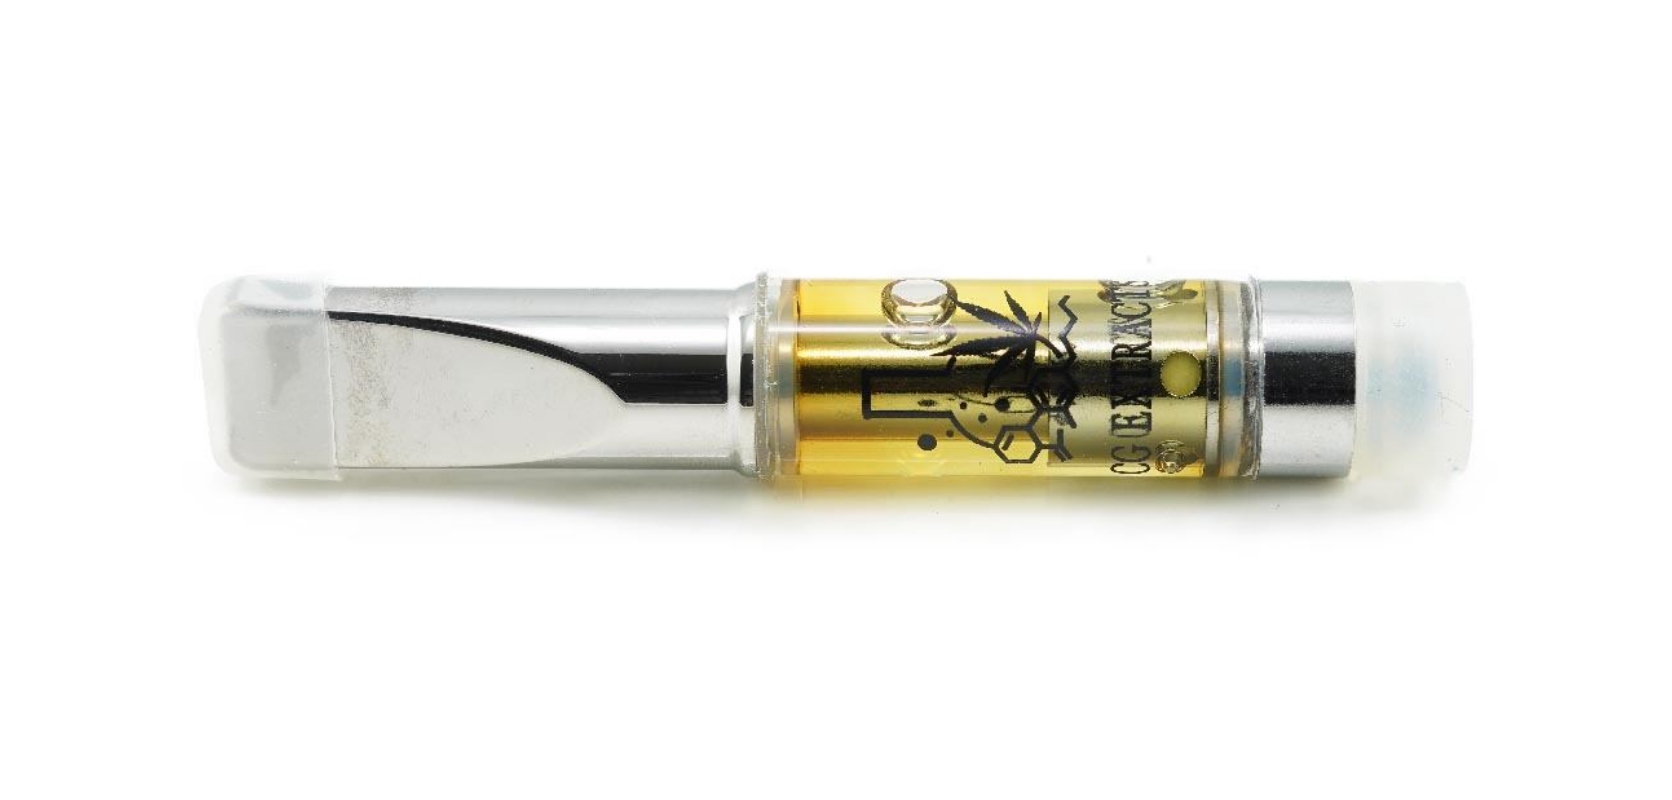 If you are looking for a unique and life-changing experience, the CG Extracts Premium Concentrates Mimosa 1ml is the right option for you. 